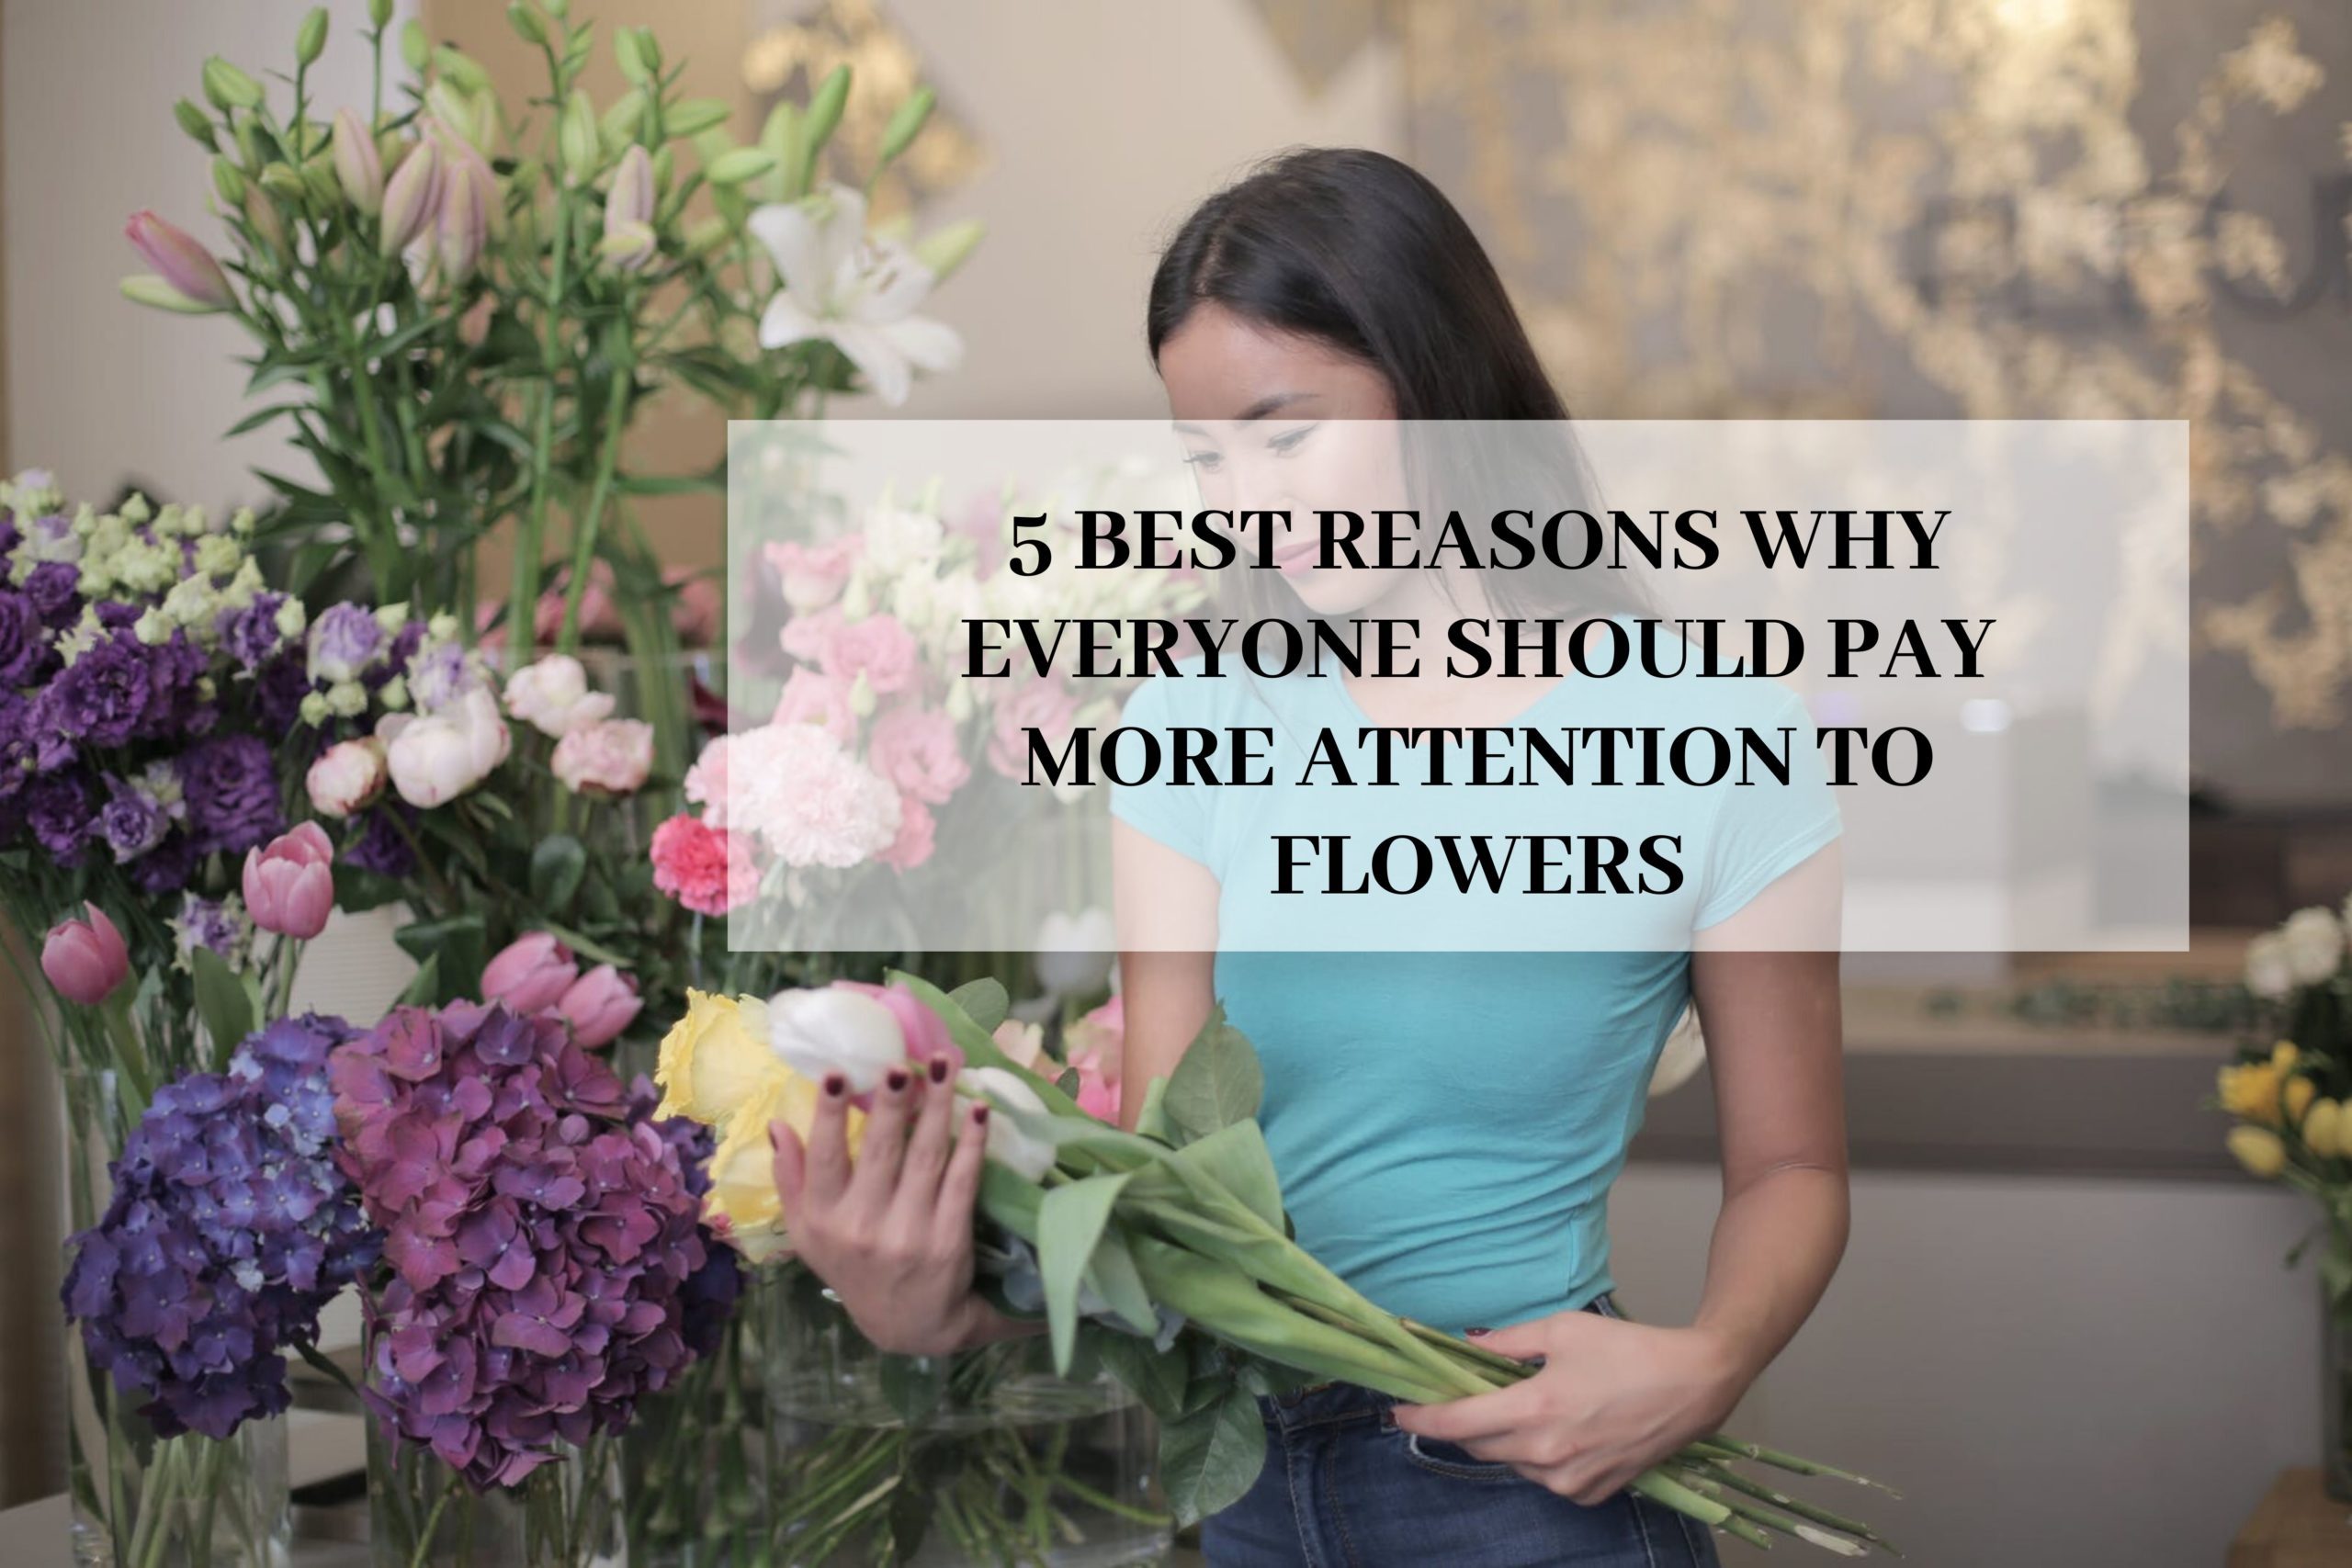 5 Best Reasons Why Everyone Should Pay More Attention to Flowers !!!